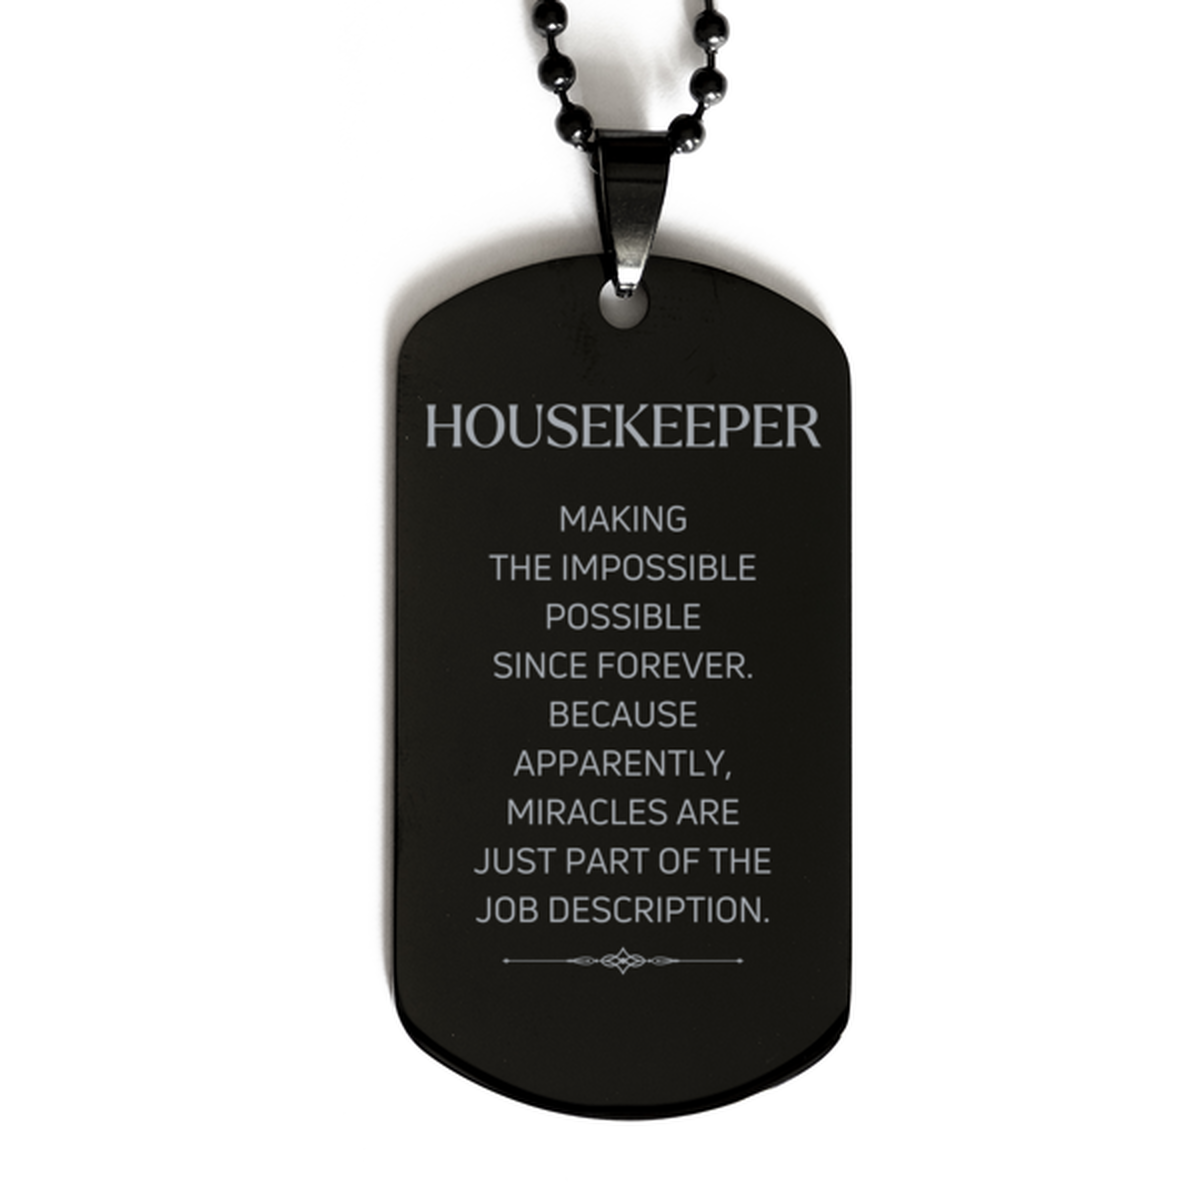 Funny Housekeeper Gifts, Miracles are just part of the job description, Inspirational Birthday Black Dog Tag For Housekeeper, Men, Women, Coworkers, Friends, Boss